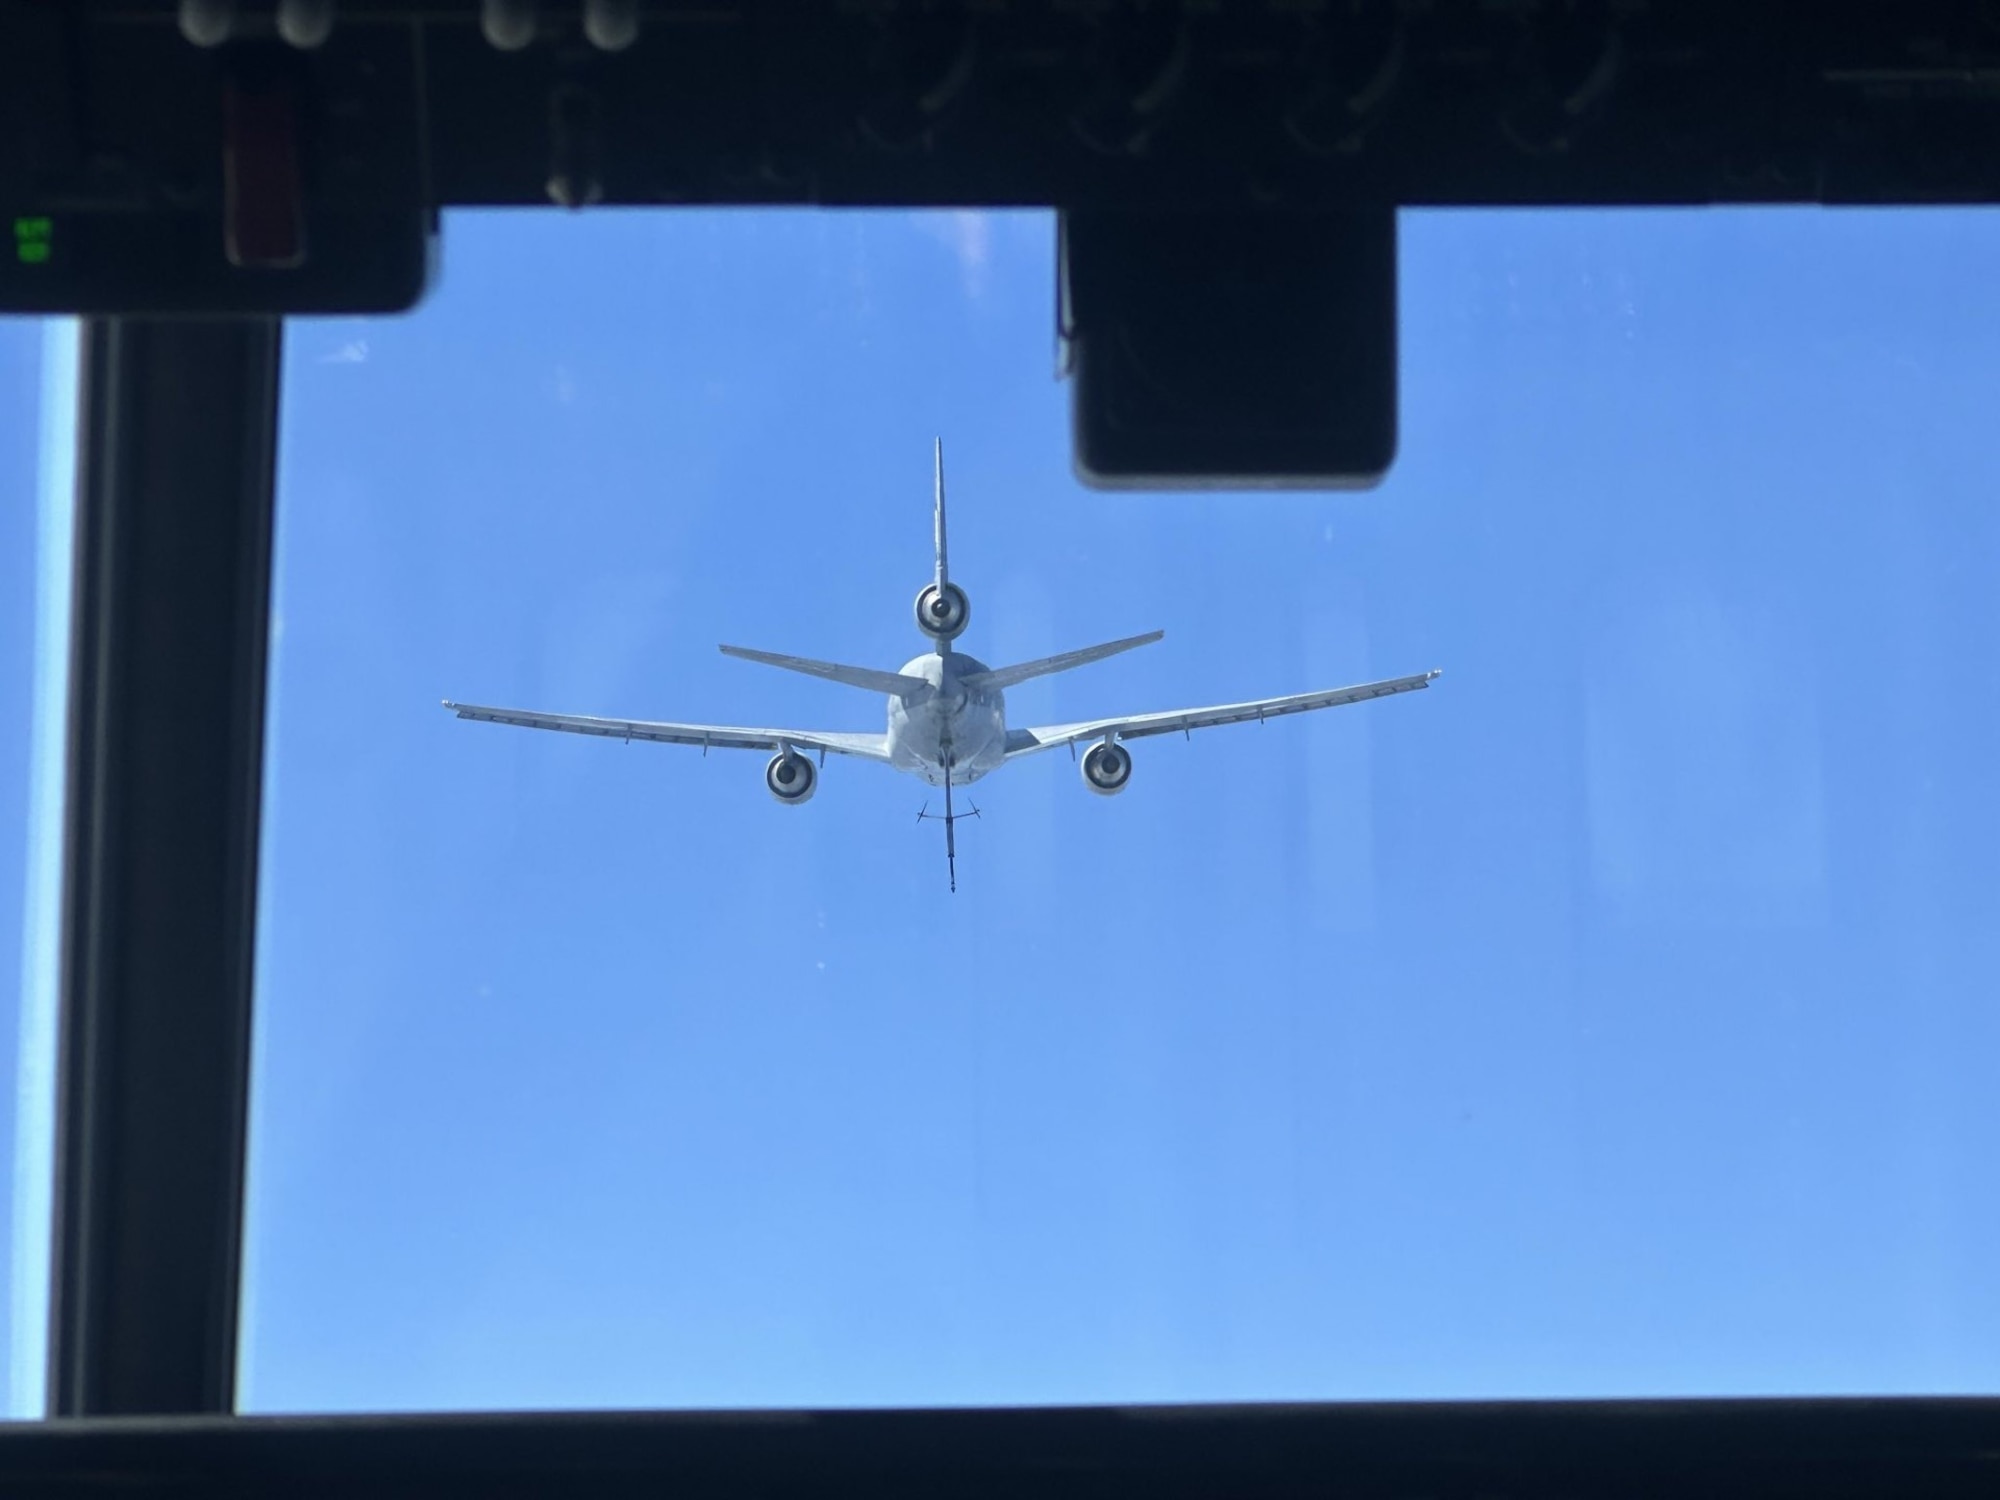 Omega KDC-10 completes first B-52, MC-130J refueling over Pacific Ocean